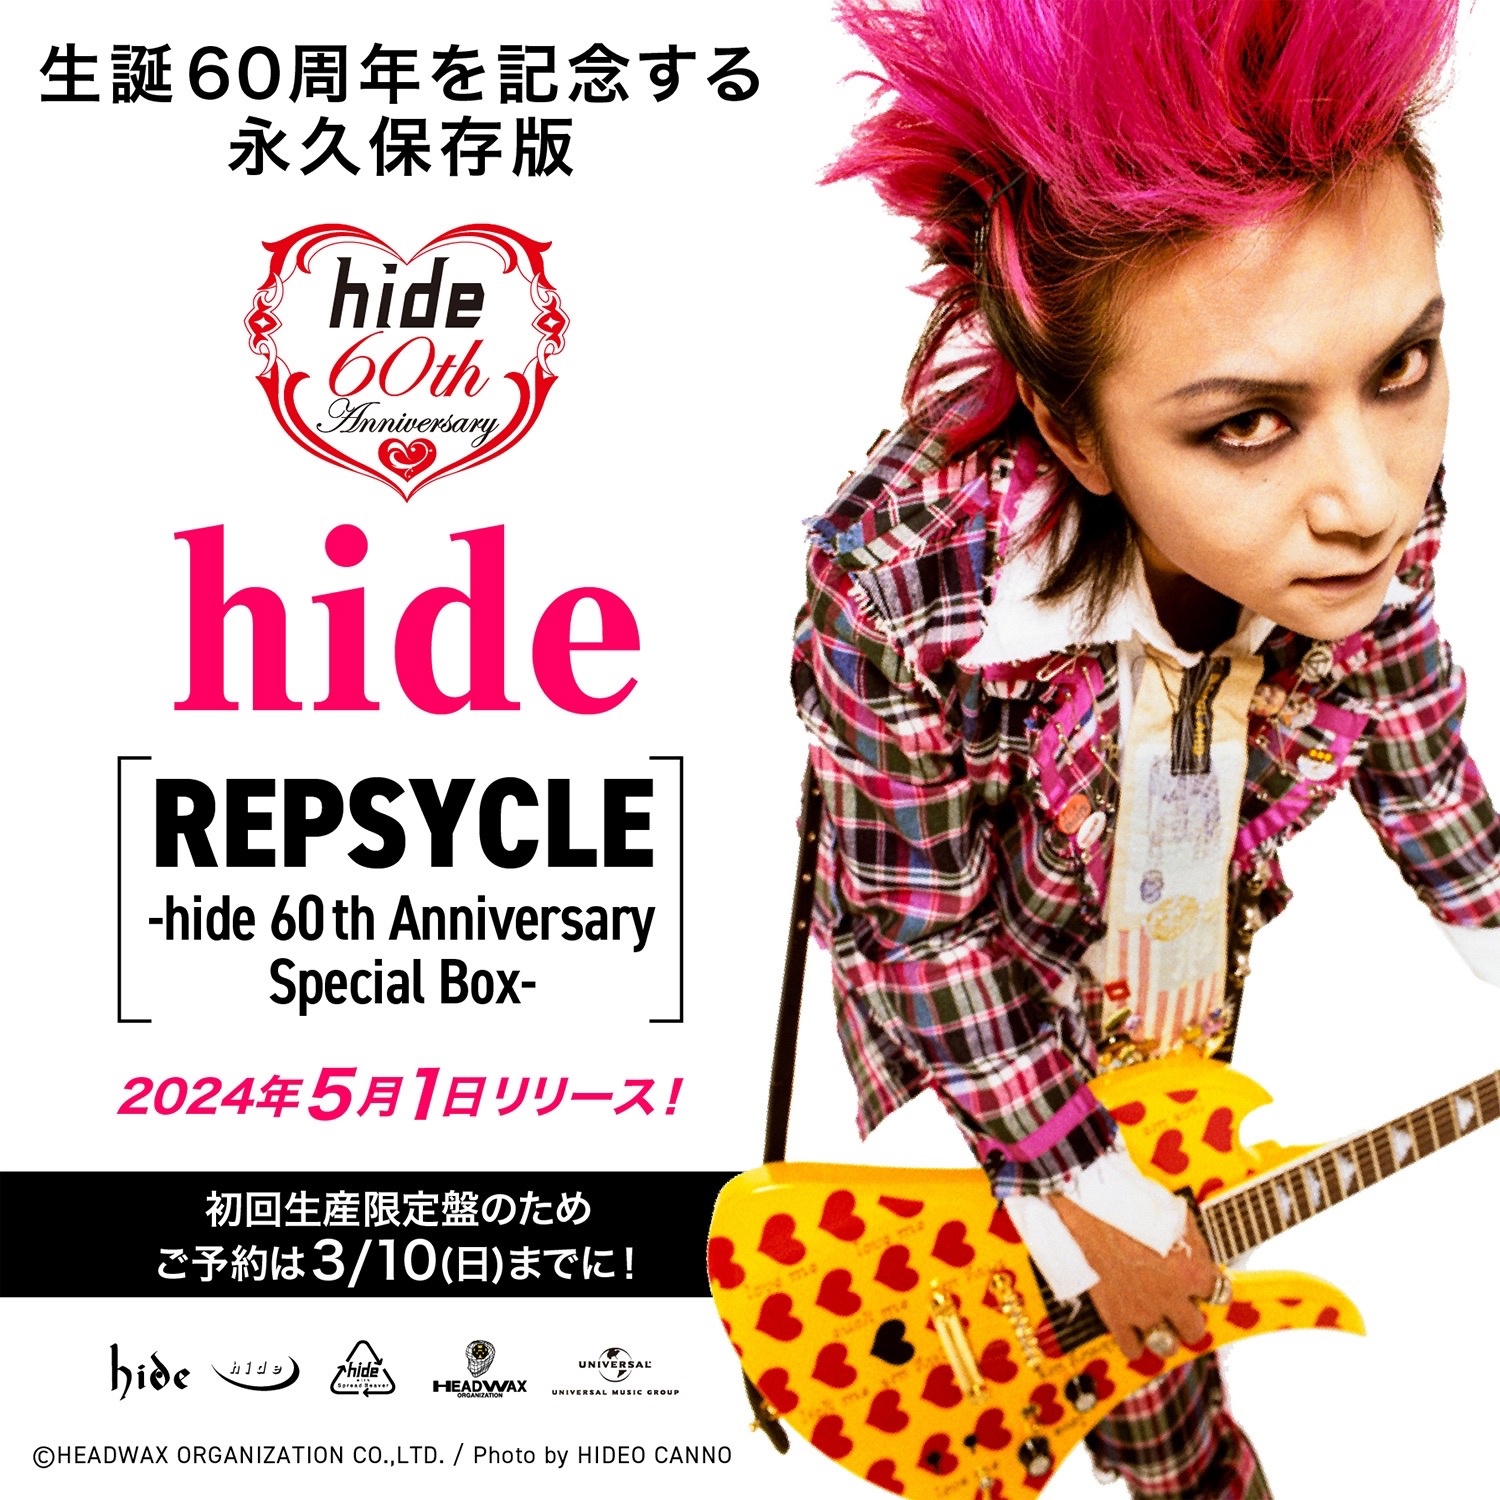 hide 60th Anniversary Dtwvxn10